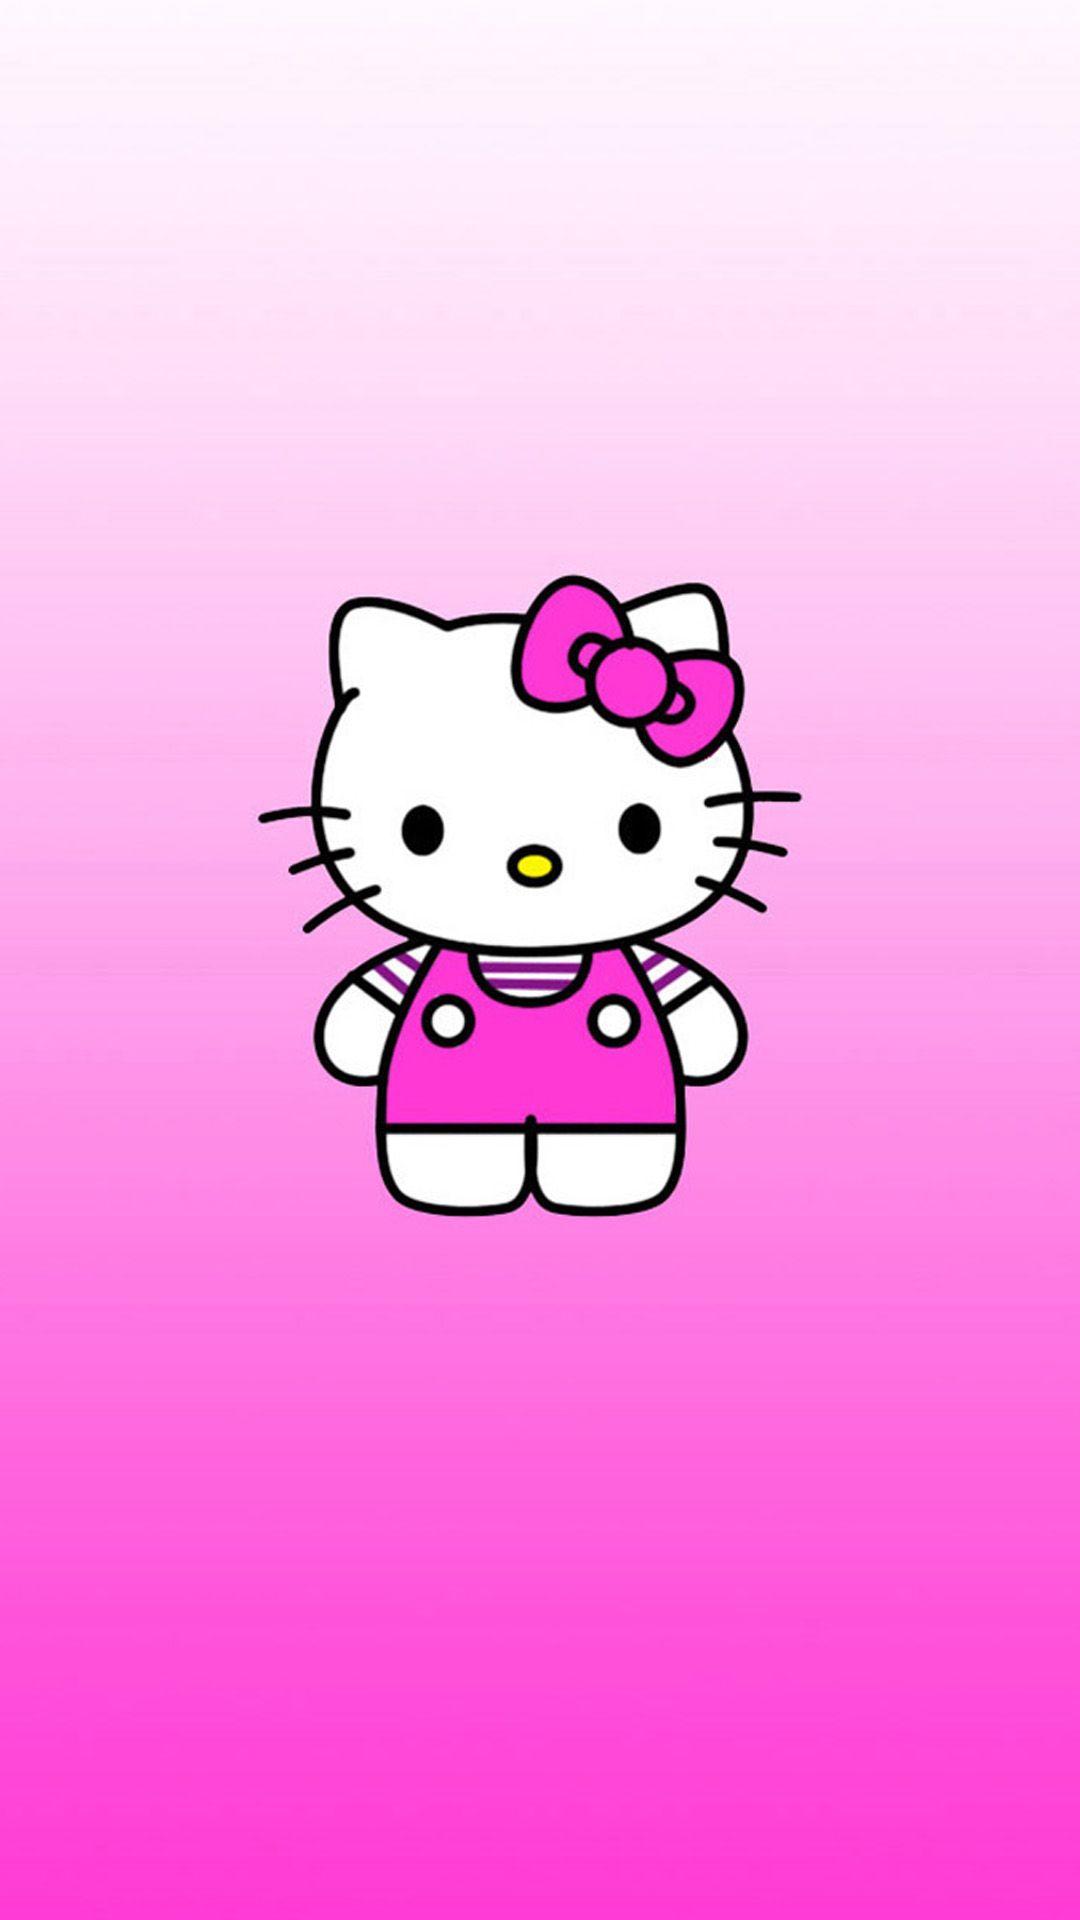 Cute pink Catty iphone new HD wallpaper background